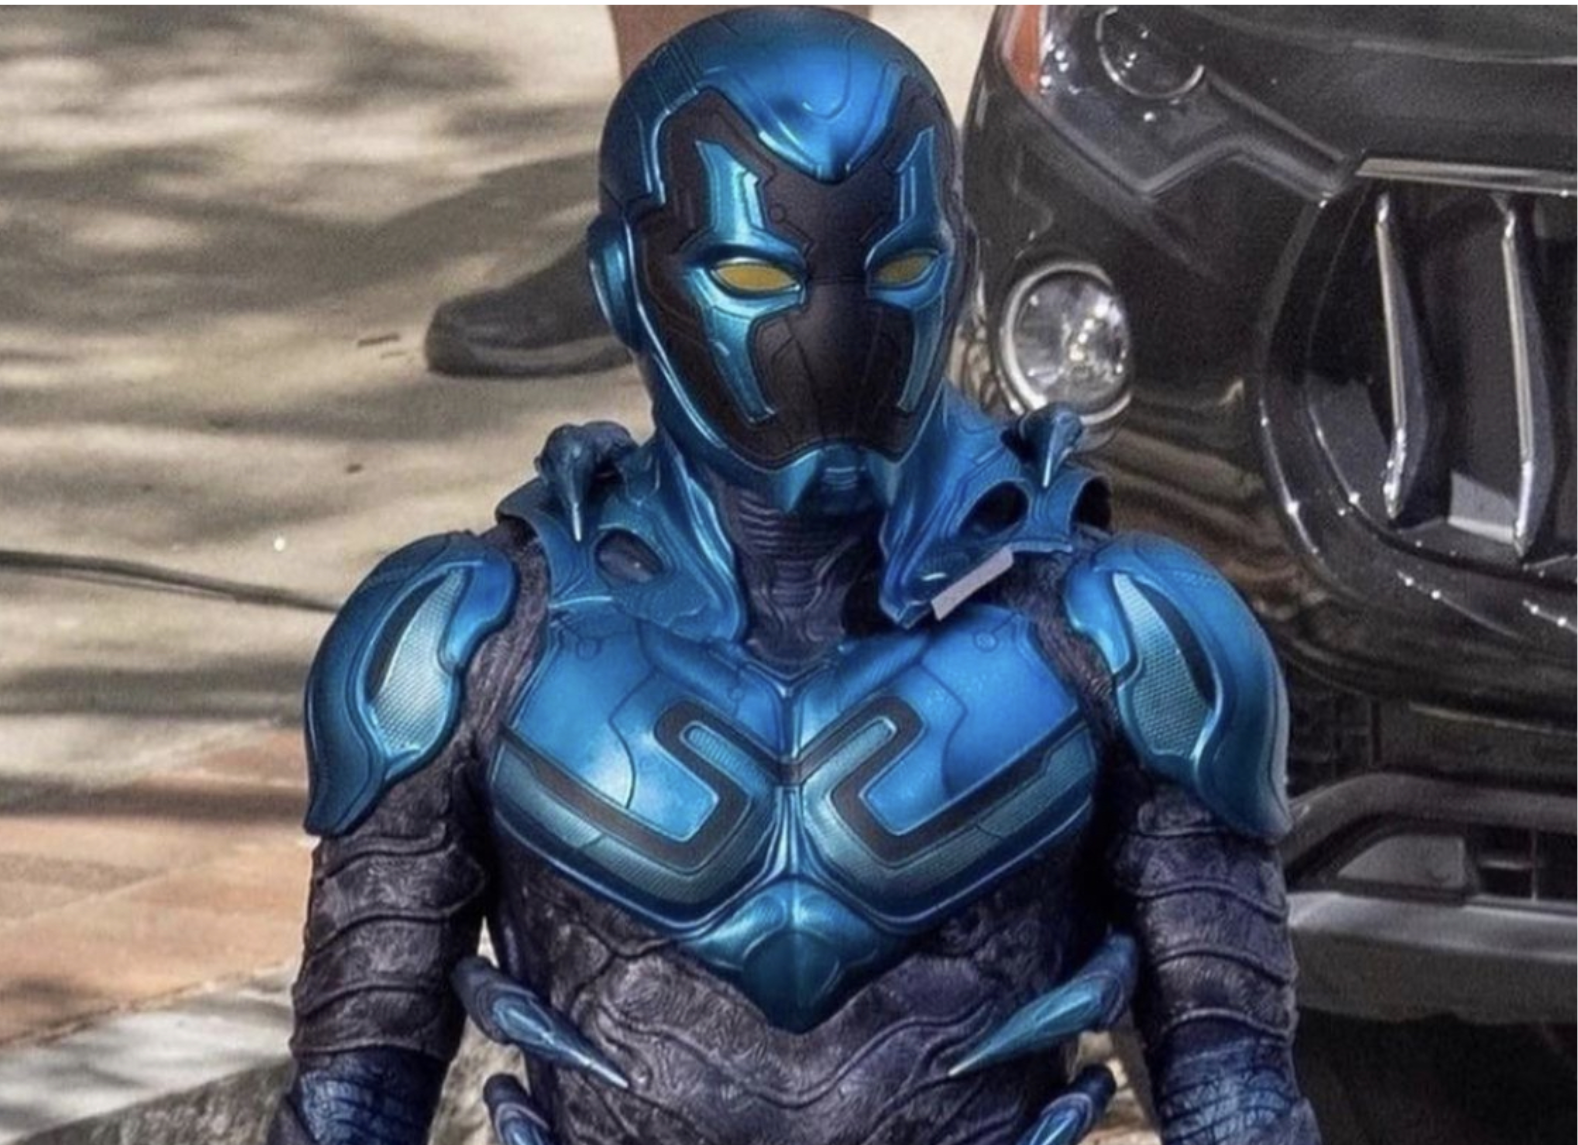 Who Is Blue Beetle?